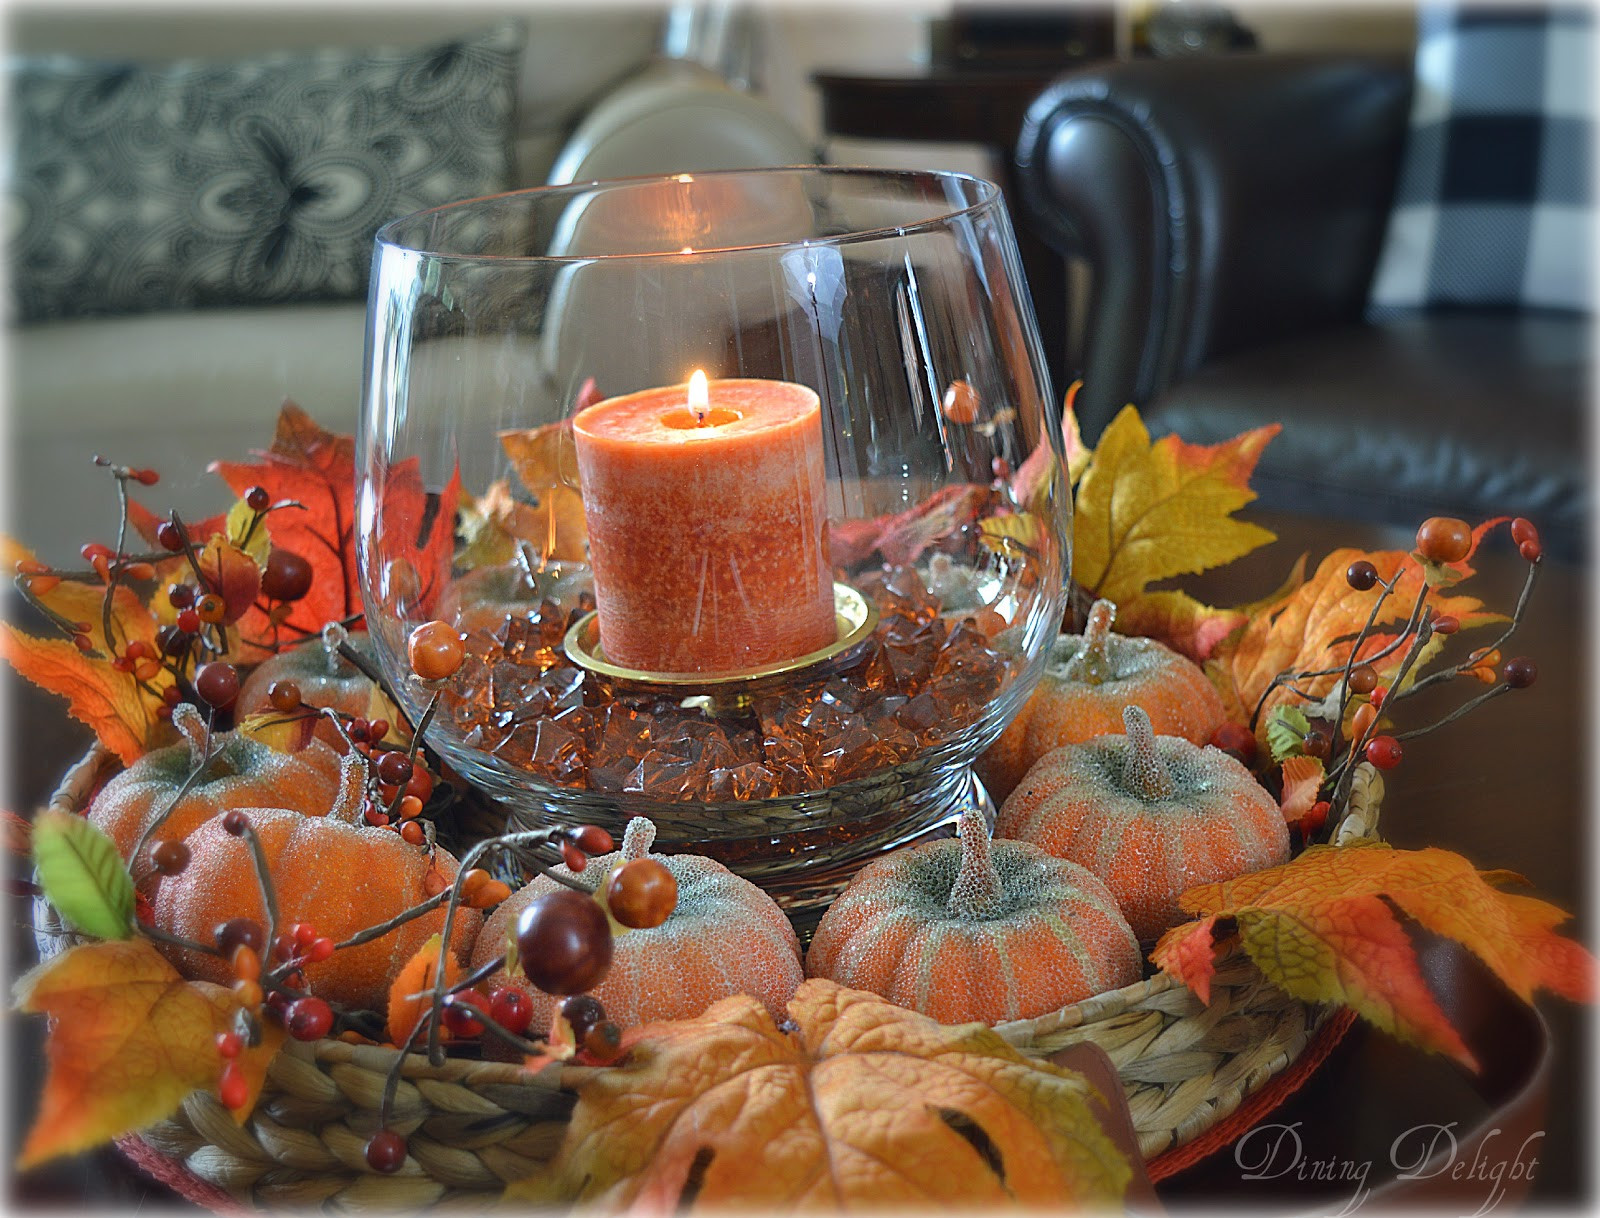 Best ideas about Coffee Table Centerpiece
. Save or Pin Dining Delight Fall Coffee Table Centerpiece Now.